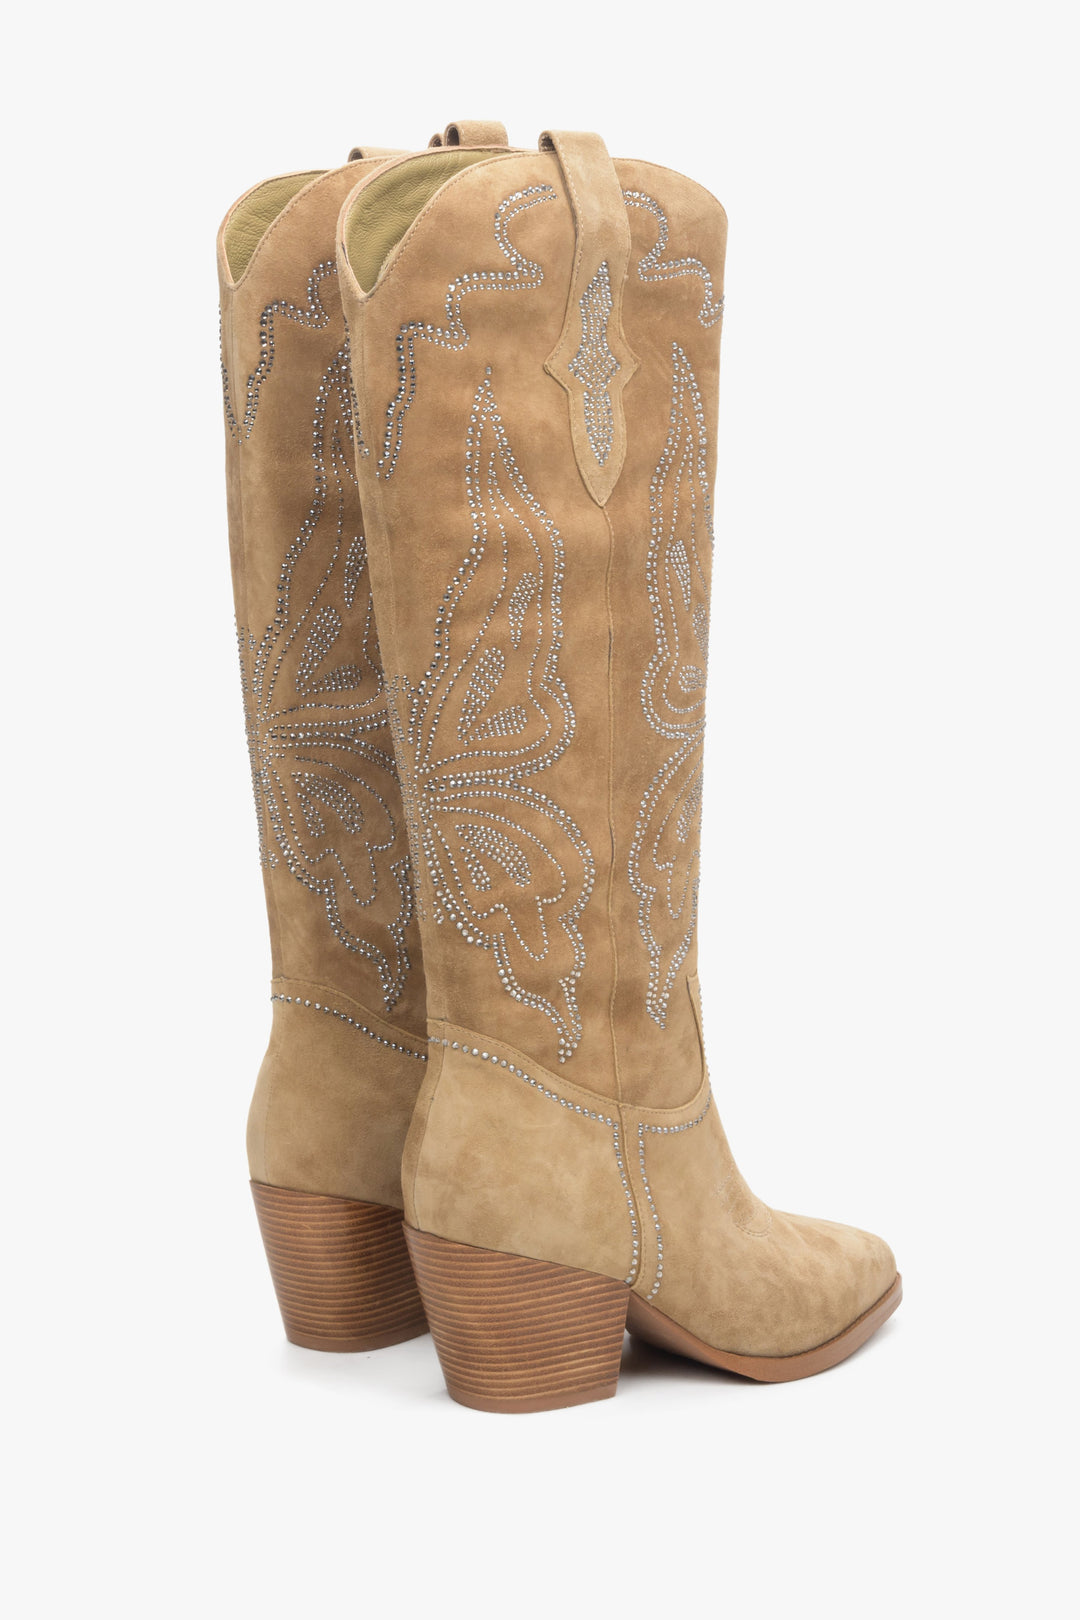 High women's cowboy boots in beige made of genuine velour, Estro - close-up on the side and back of the model.